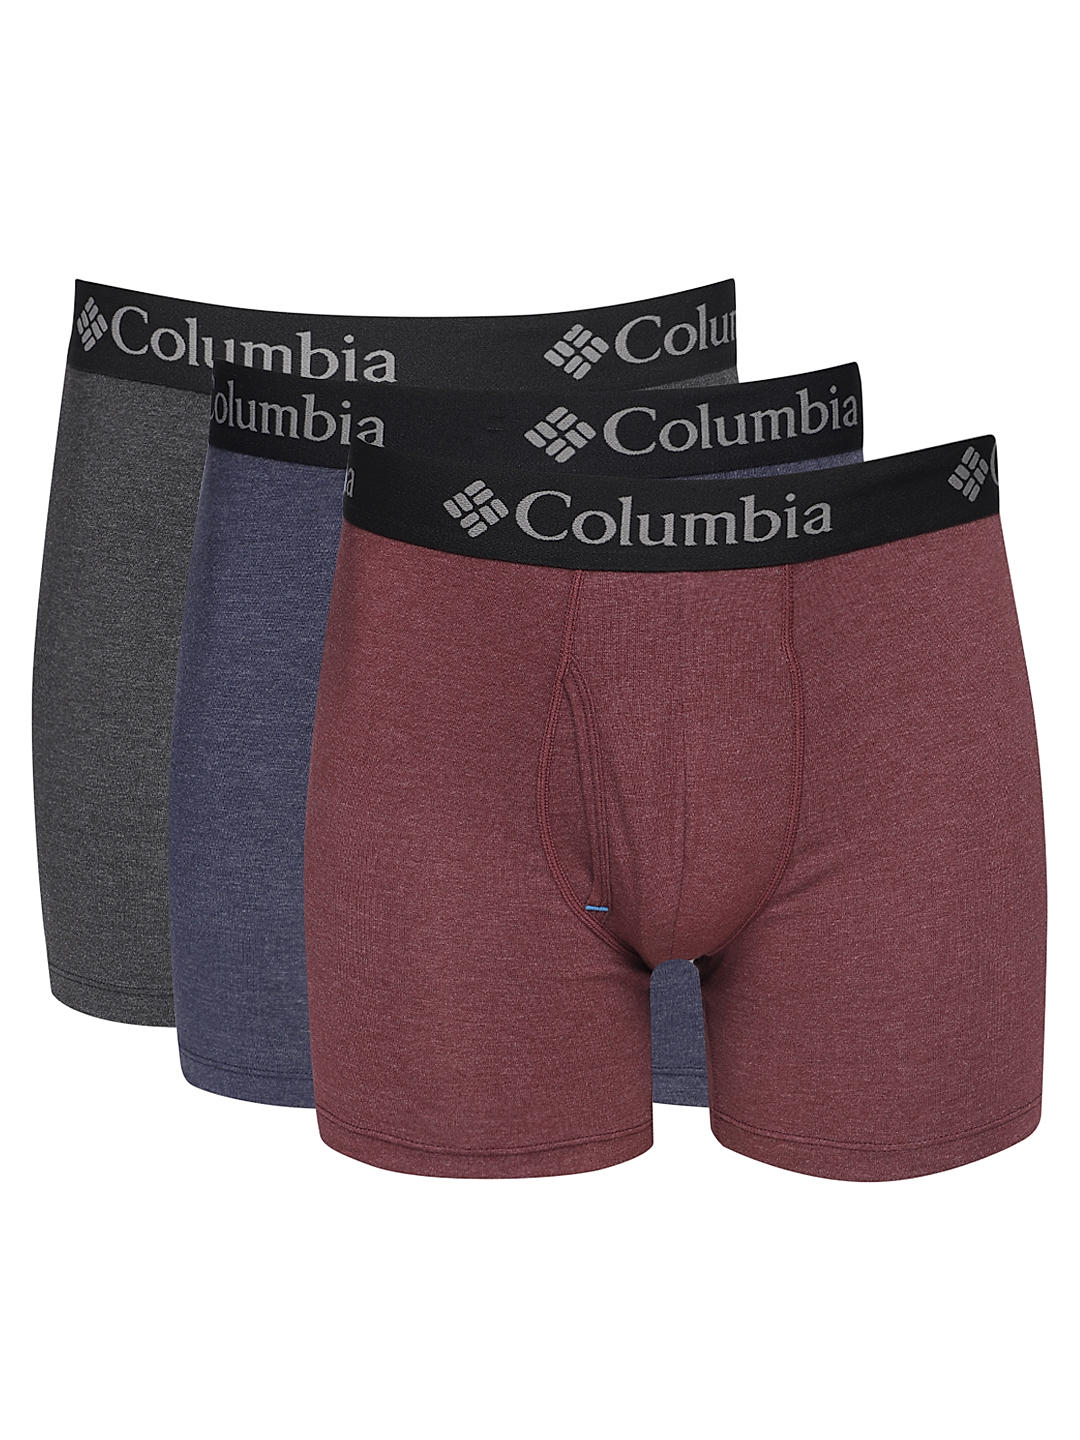 Columbia Men Multi Performance Cotton / Stretch Boxer Briefs Packe of 3